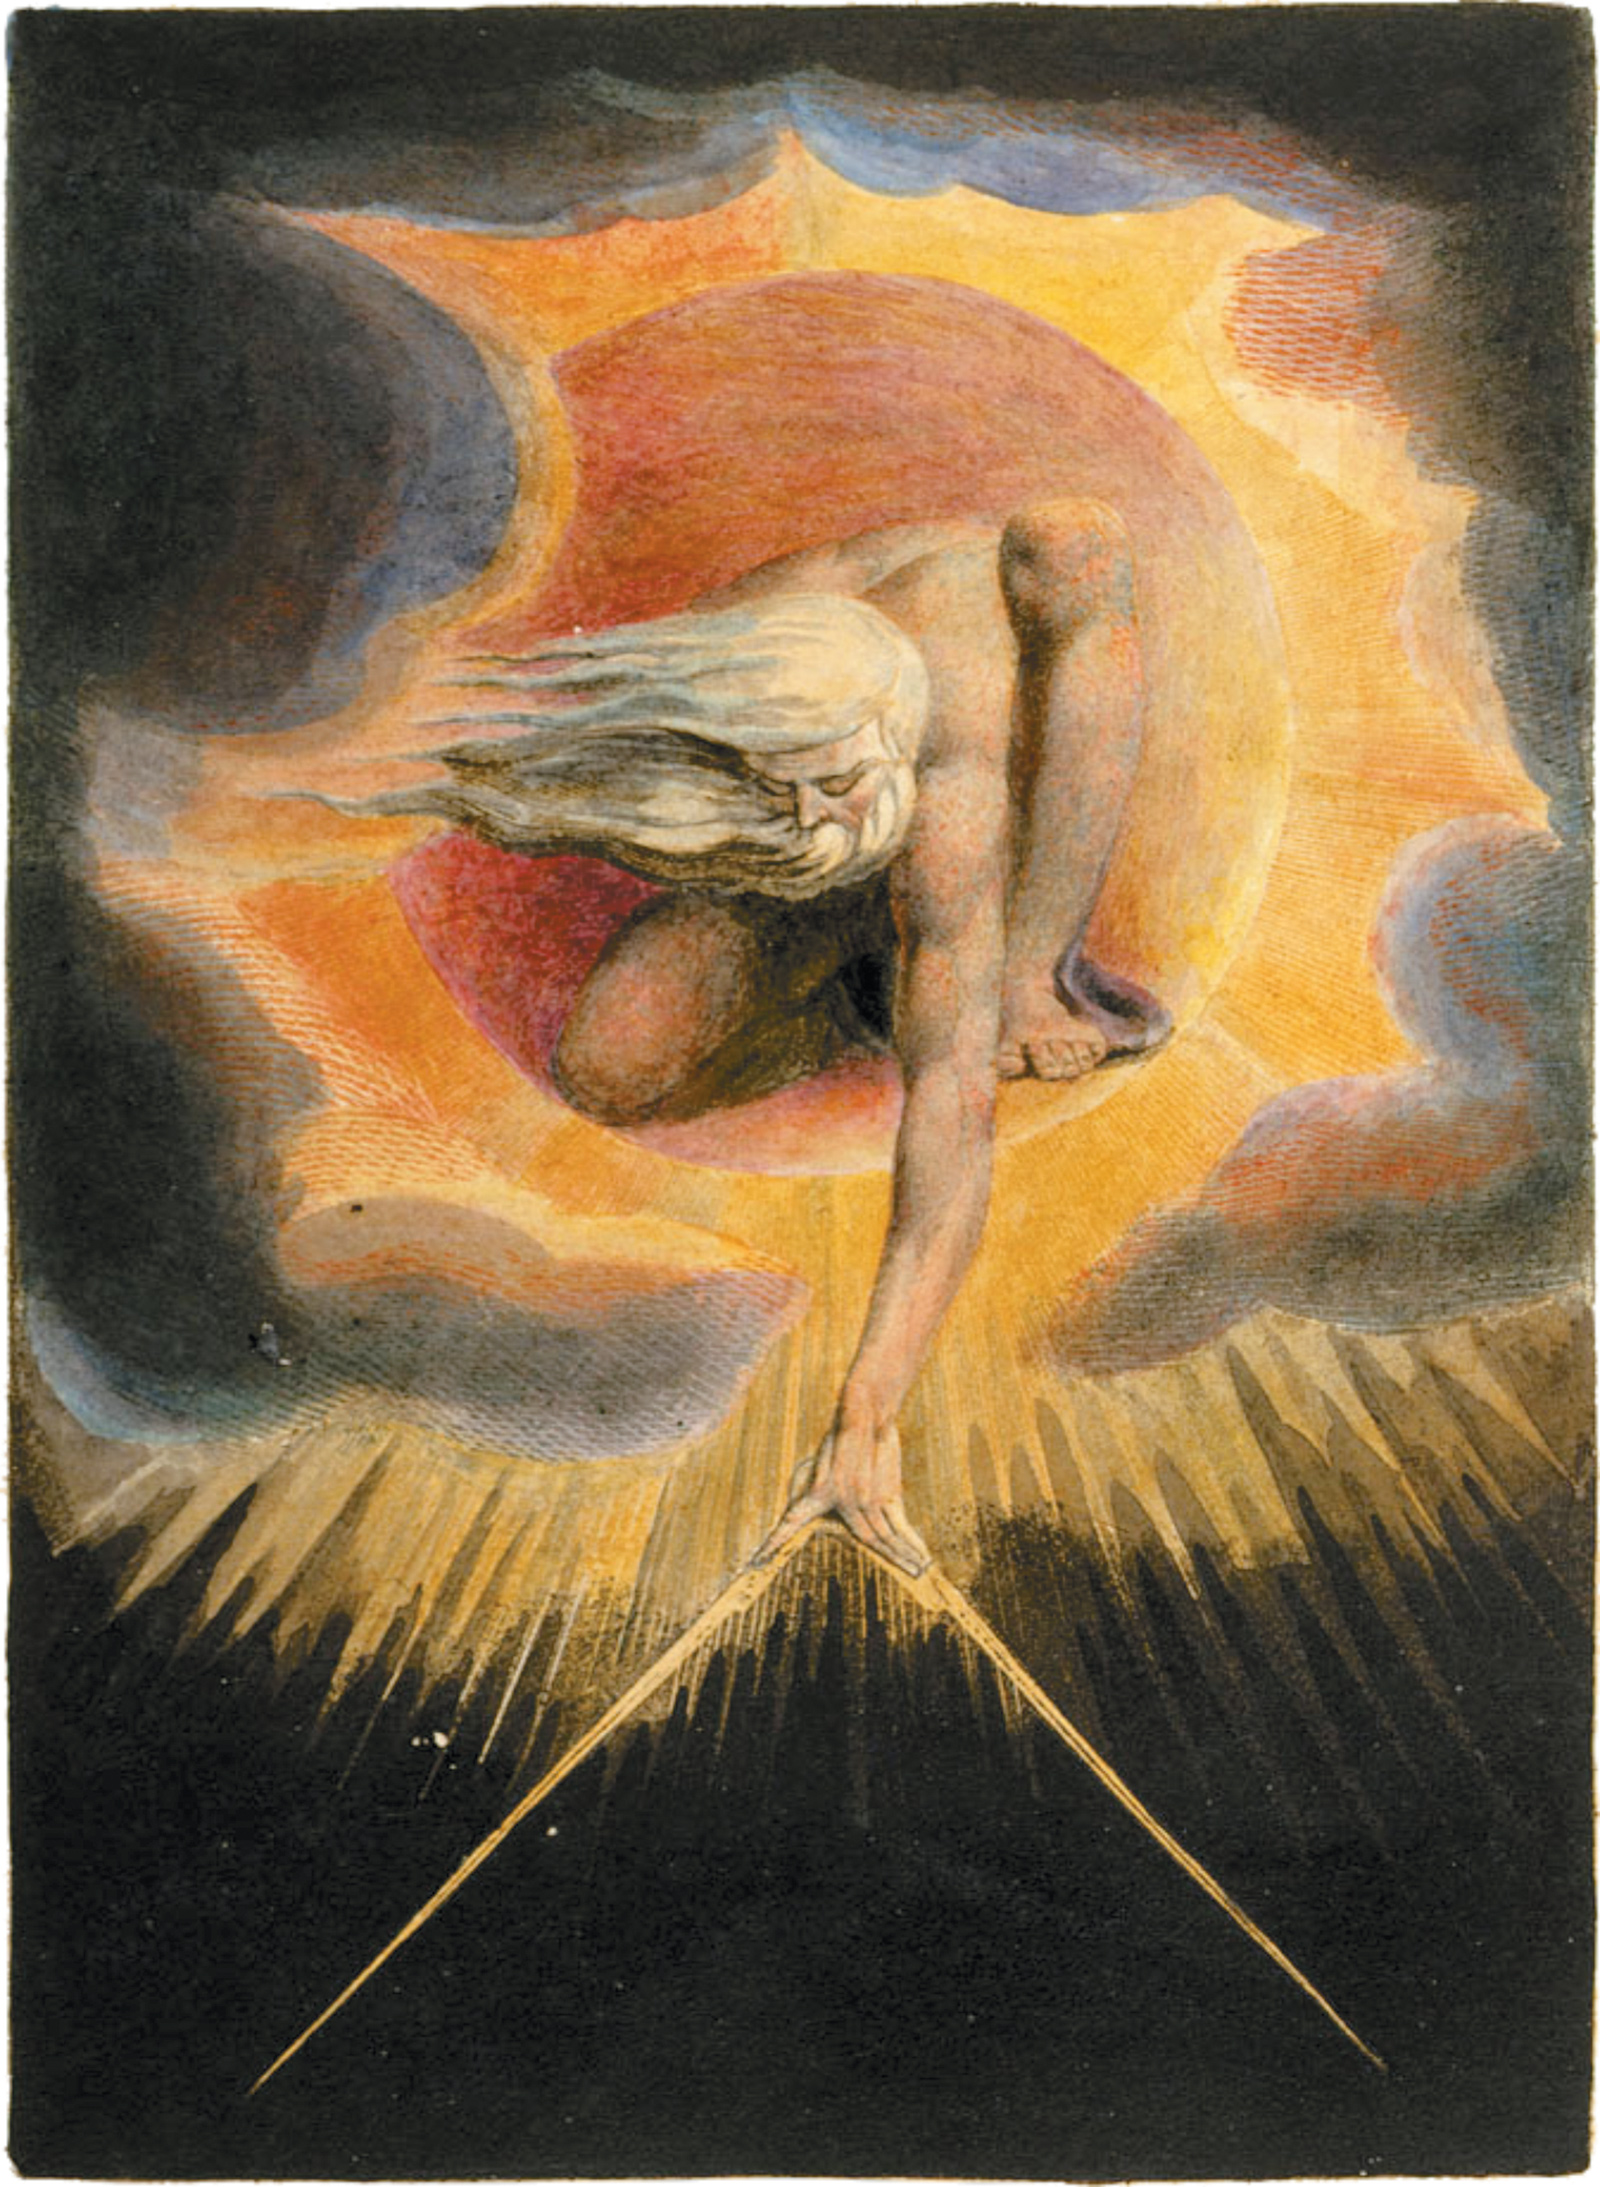 William Blake: The Ancient of Days, frontispiece to Europe a Prophecy, 1794